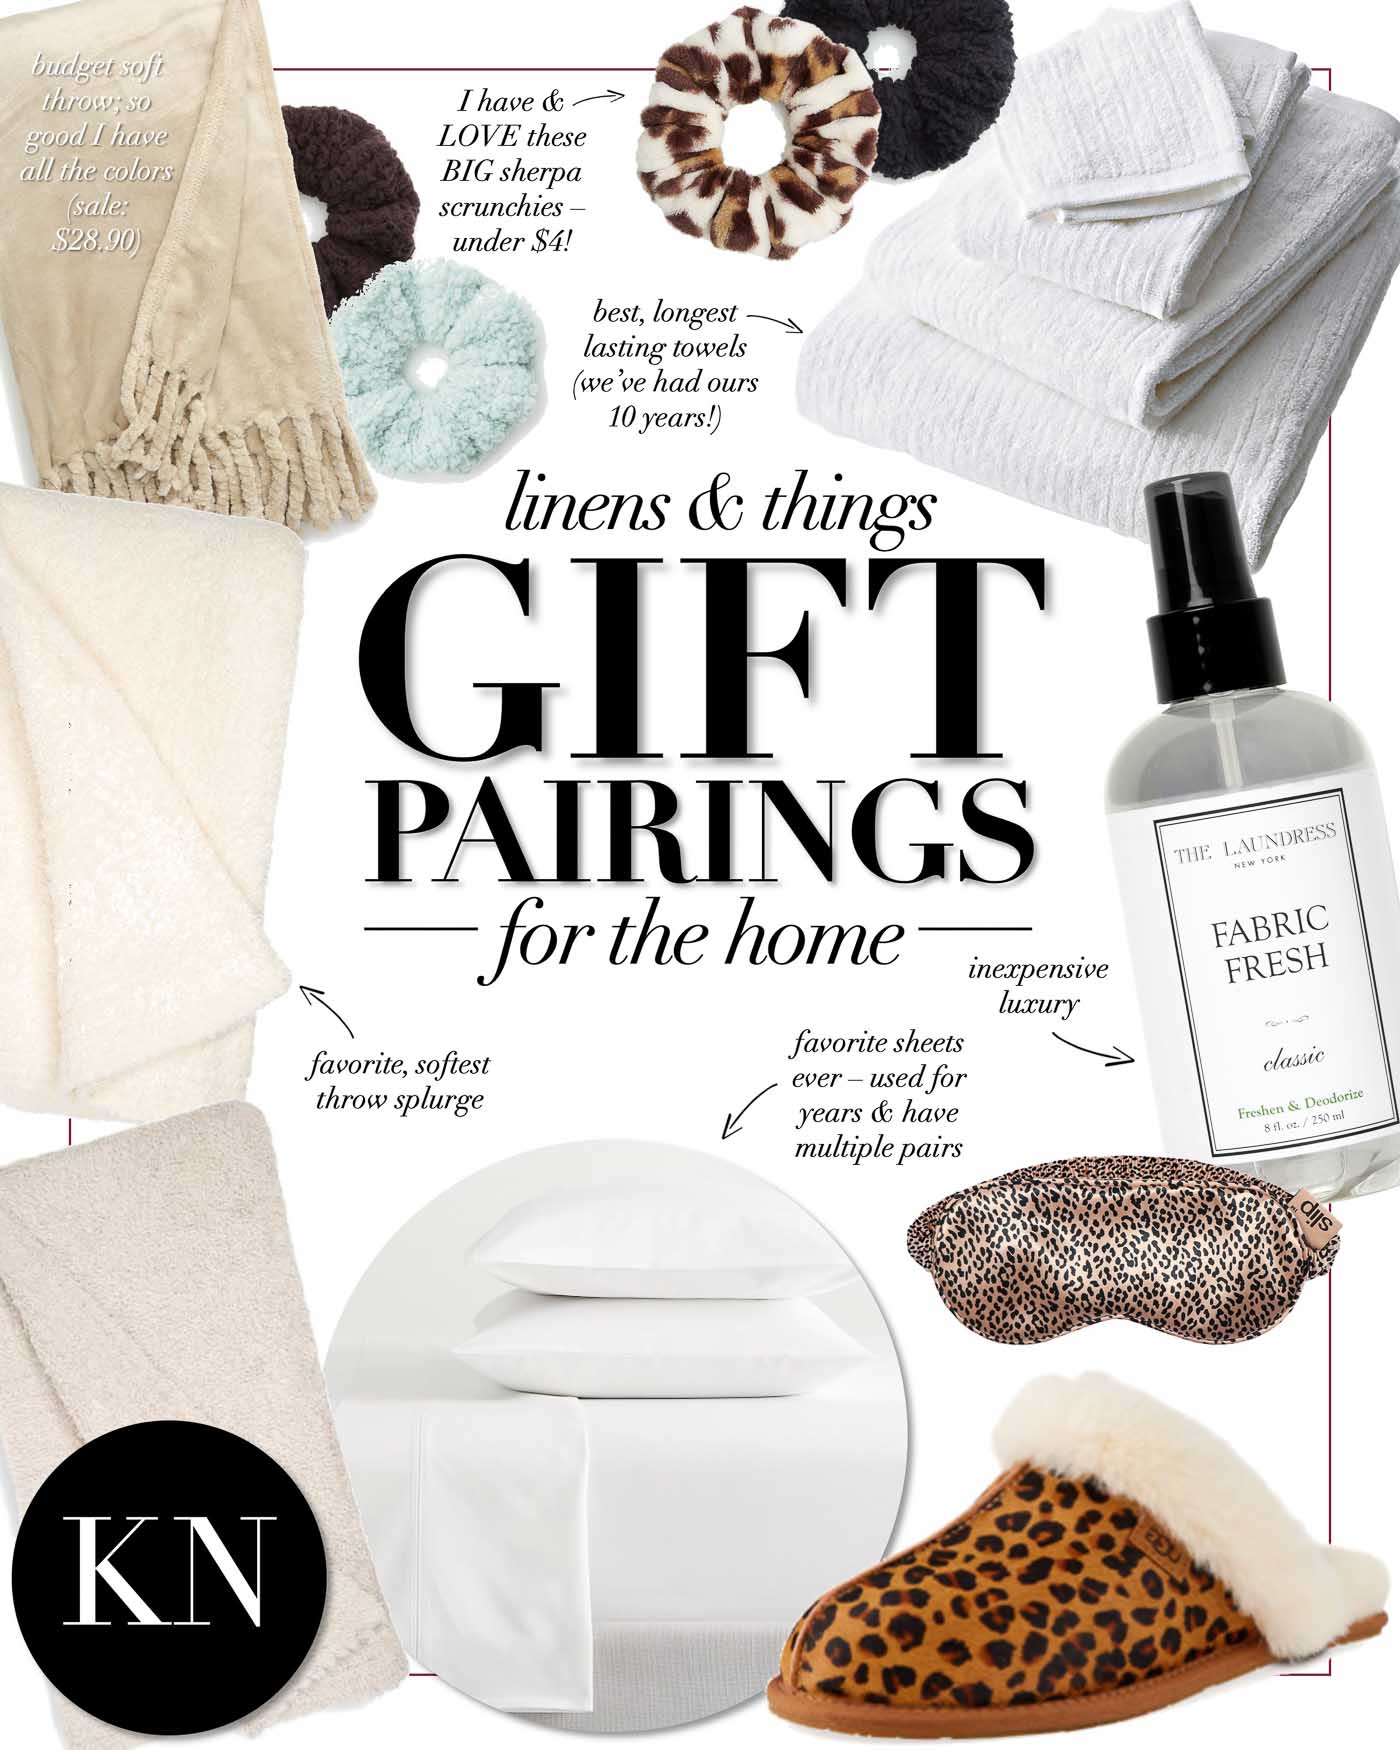 Themed Christmas Gift Pairing Ideas for the Home